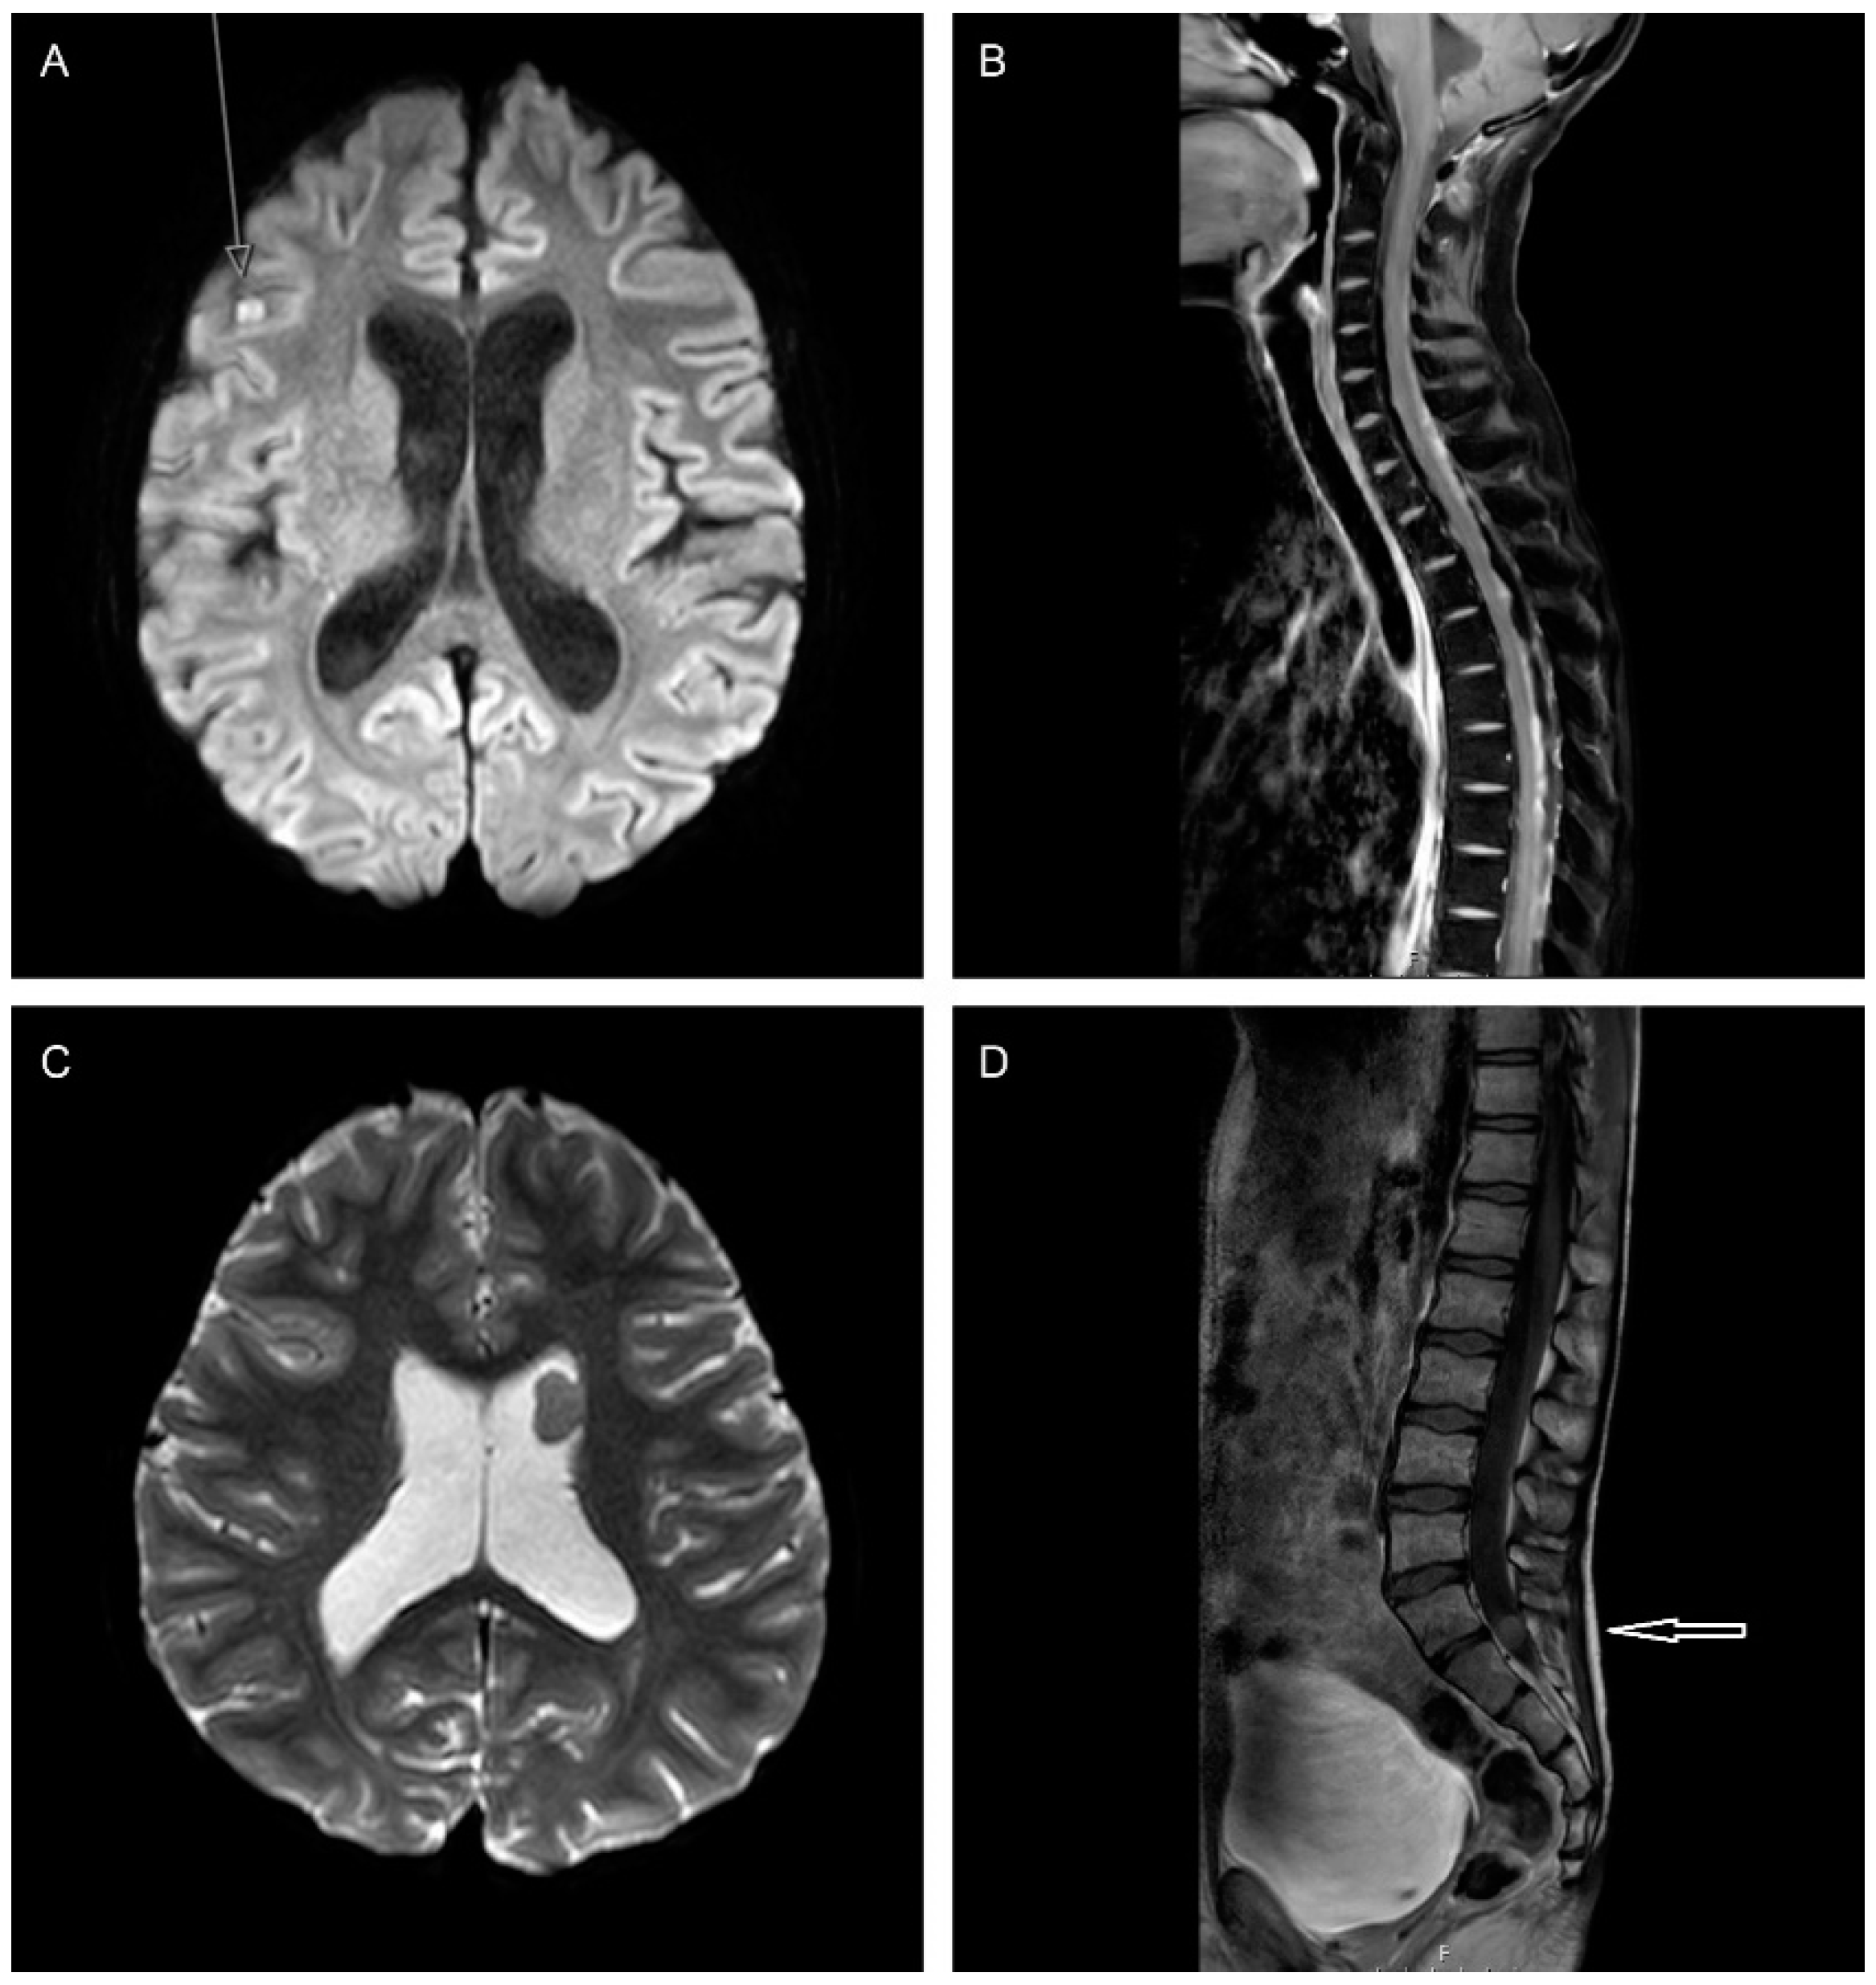 Cancers Free Full-Text | Relapsed Medulloblastoma in Pre-Irradiated Patients: Current Practice Diagnostics and Treatment